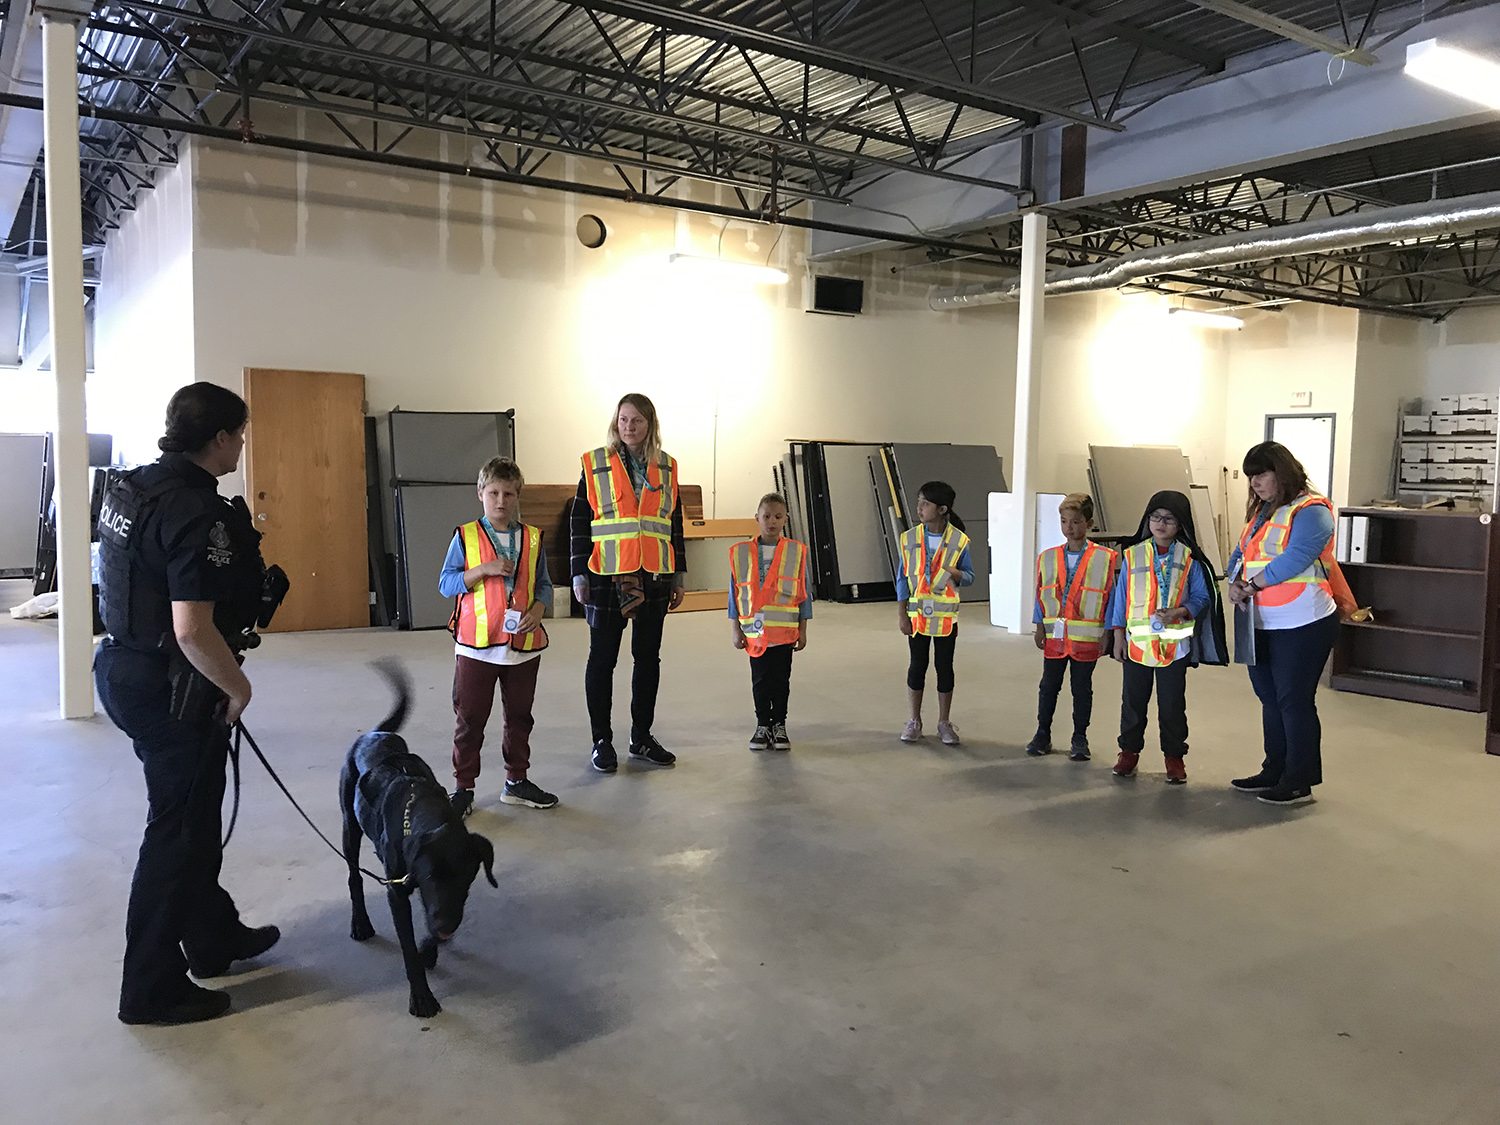 Some K9 lessons